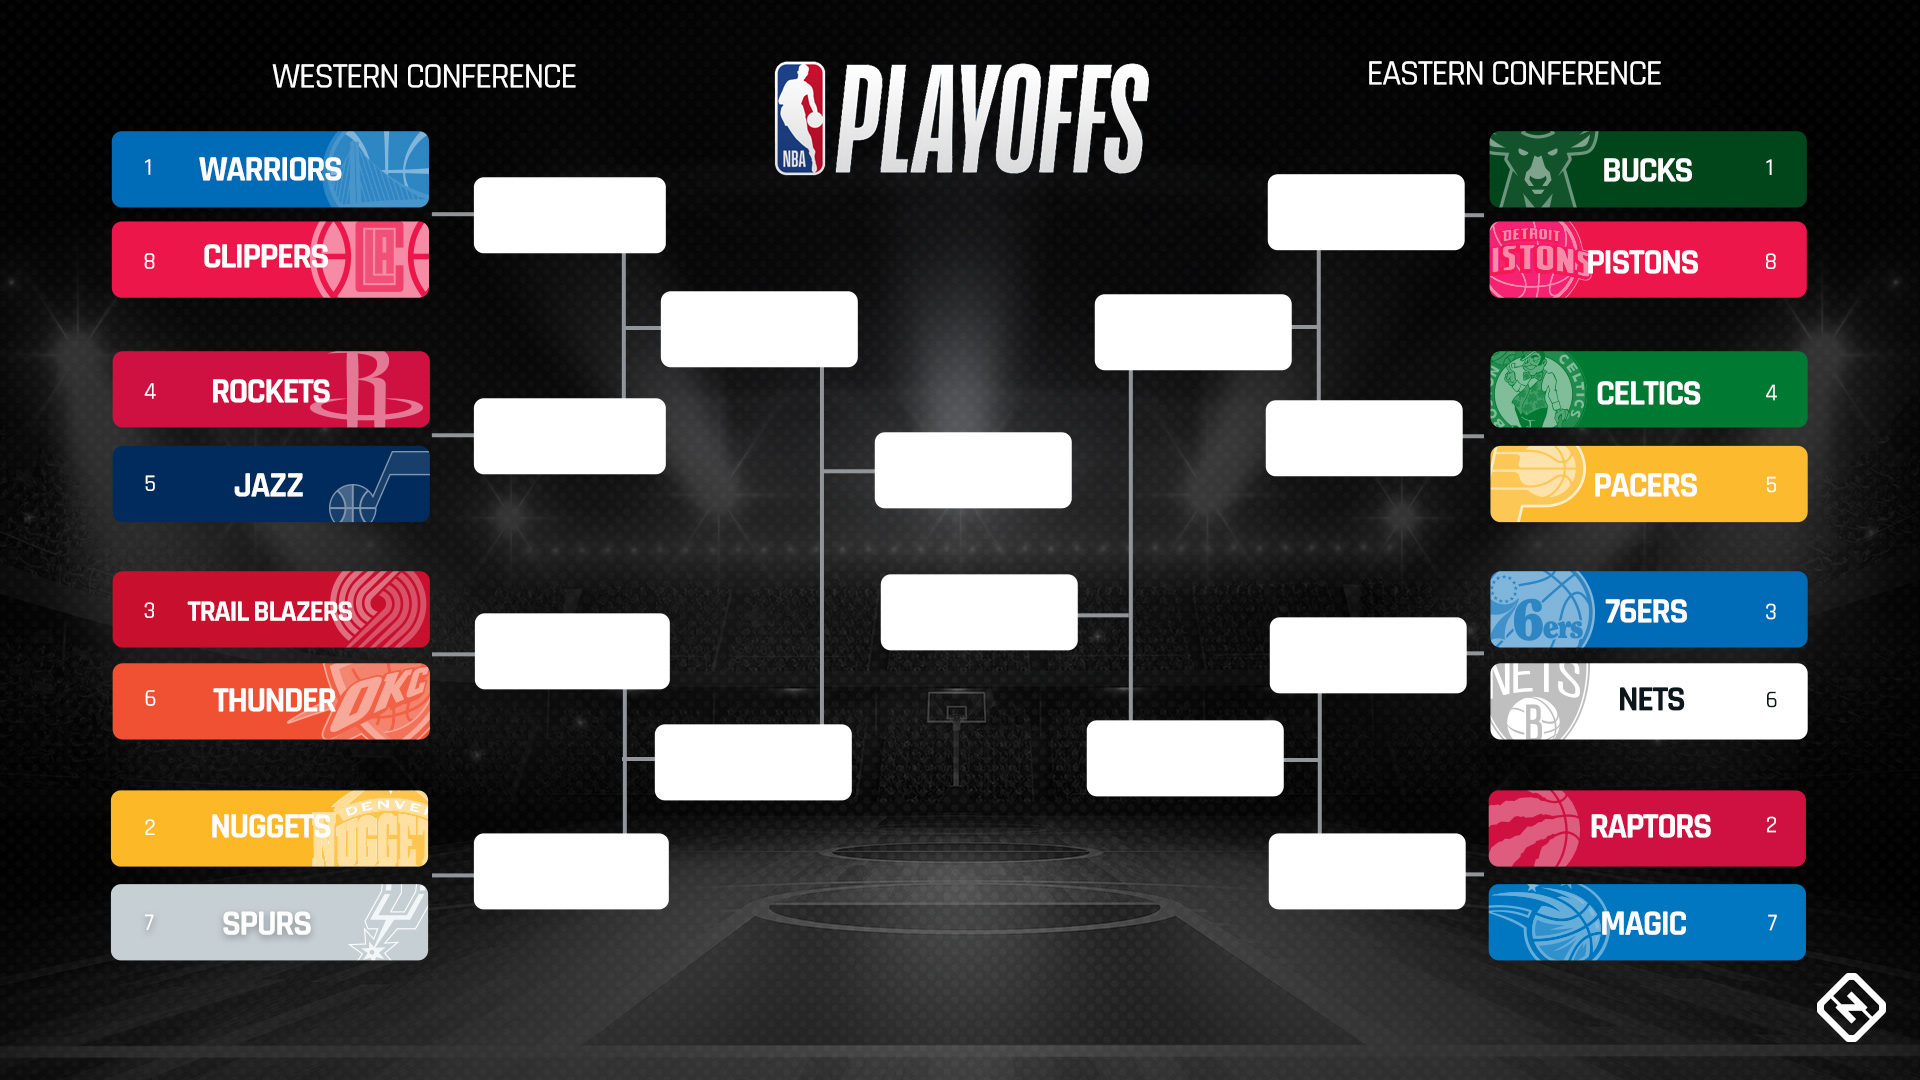 NBA playoffs today 2019 Live scores, TV schedule, updates from Monday